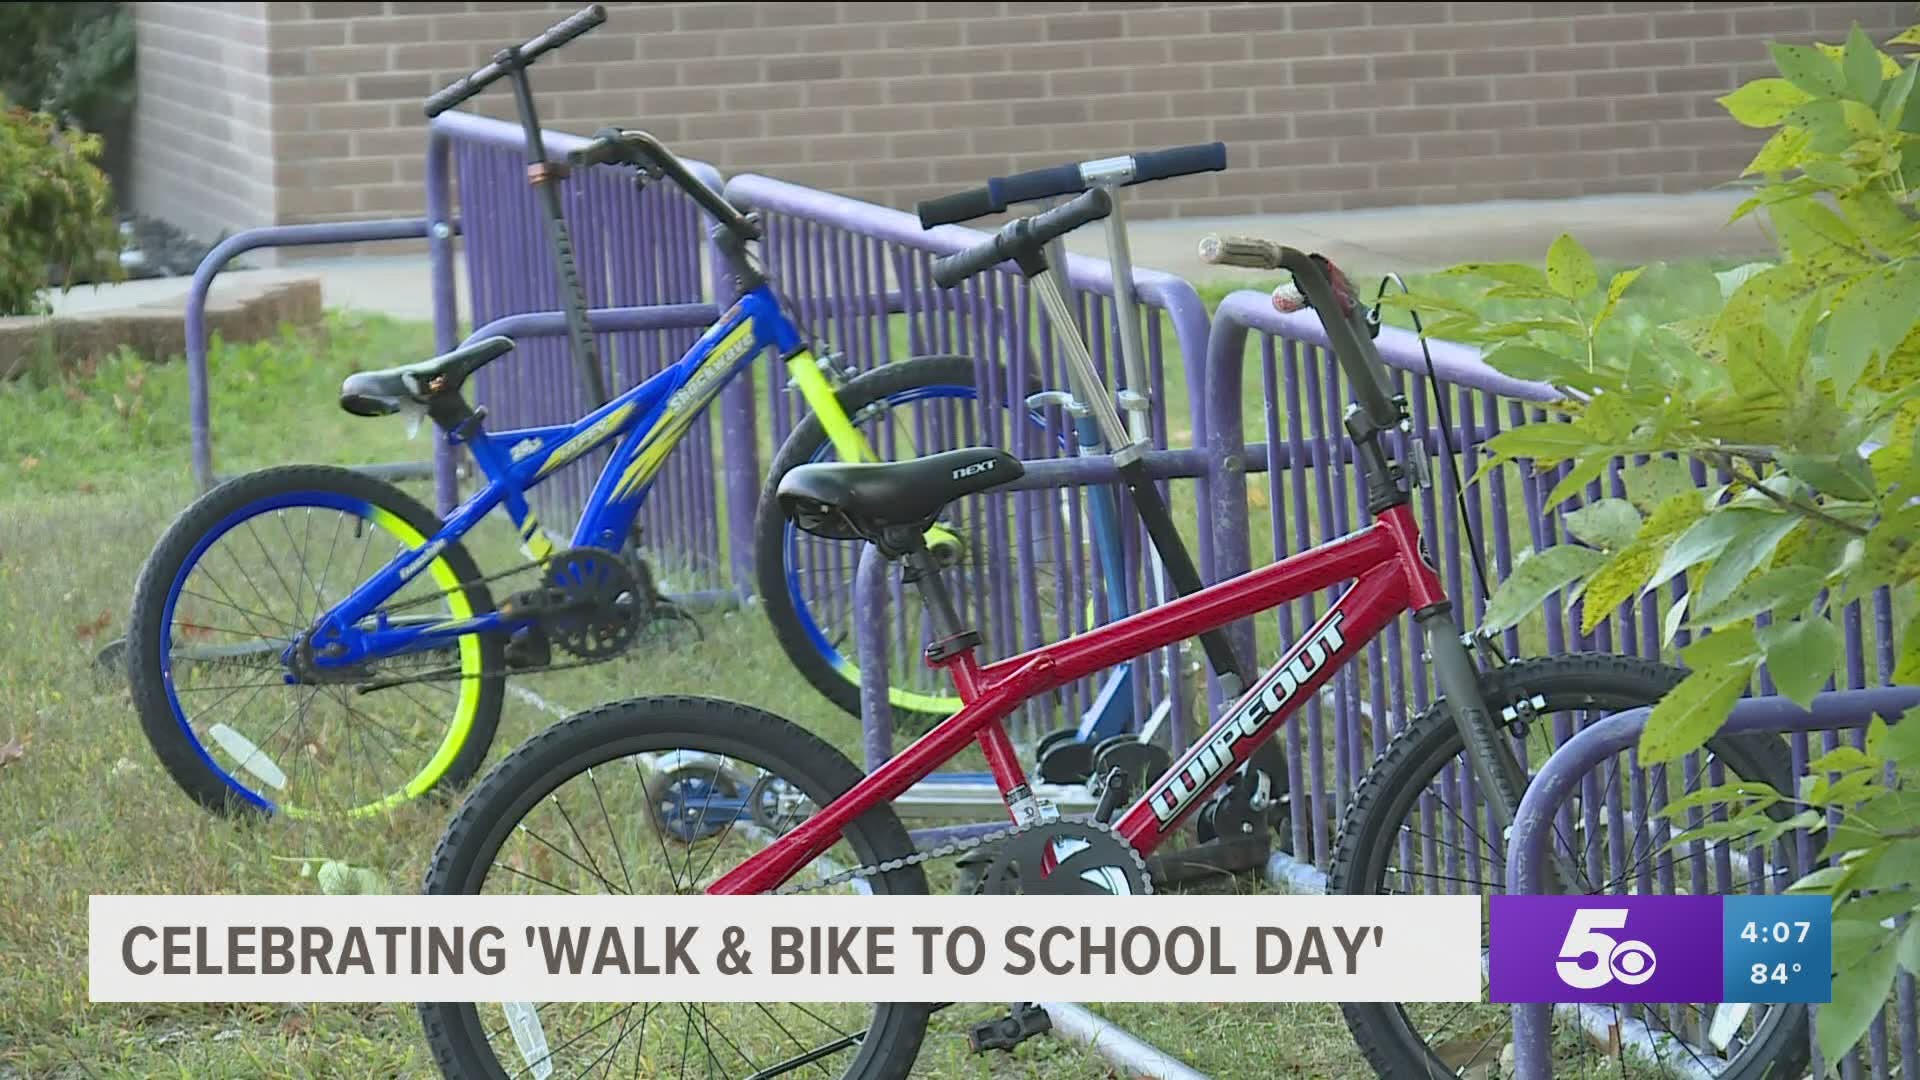 Students walked, rode their bikes and even rode their scooters to school to celebrate National Walk and Ride your Bike to School day. https://bit.ly/3loRCbm